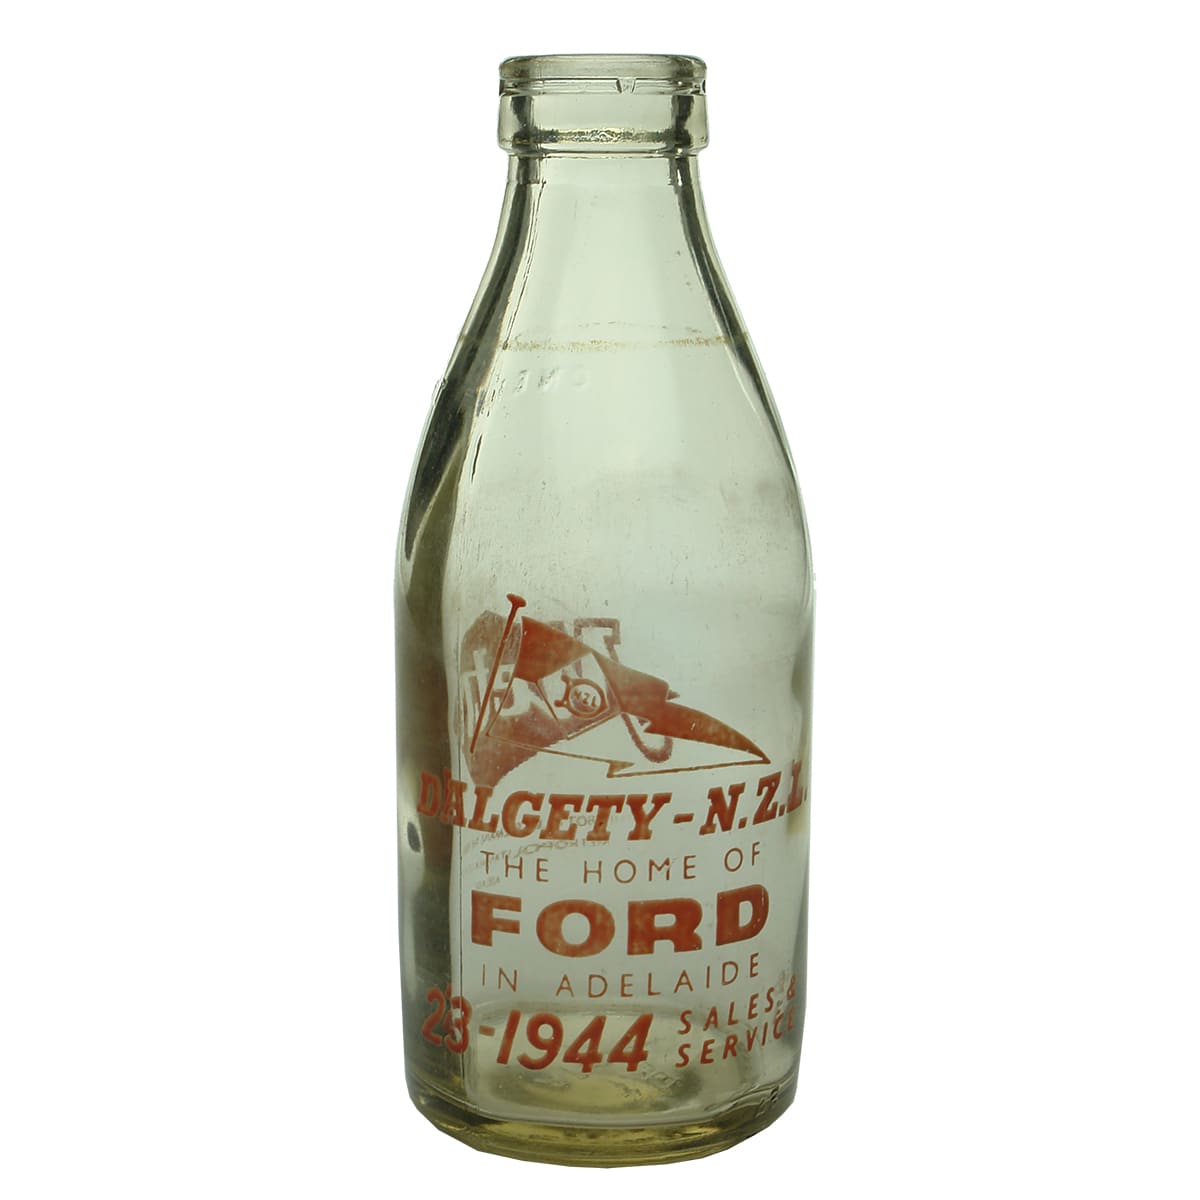 Dairy. Dalgety-N.Z.L, The Home of Ford in Adelaide. Foil Top. Ceramic Label. 1 Pint. (South Australia)